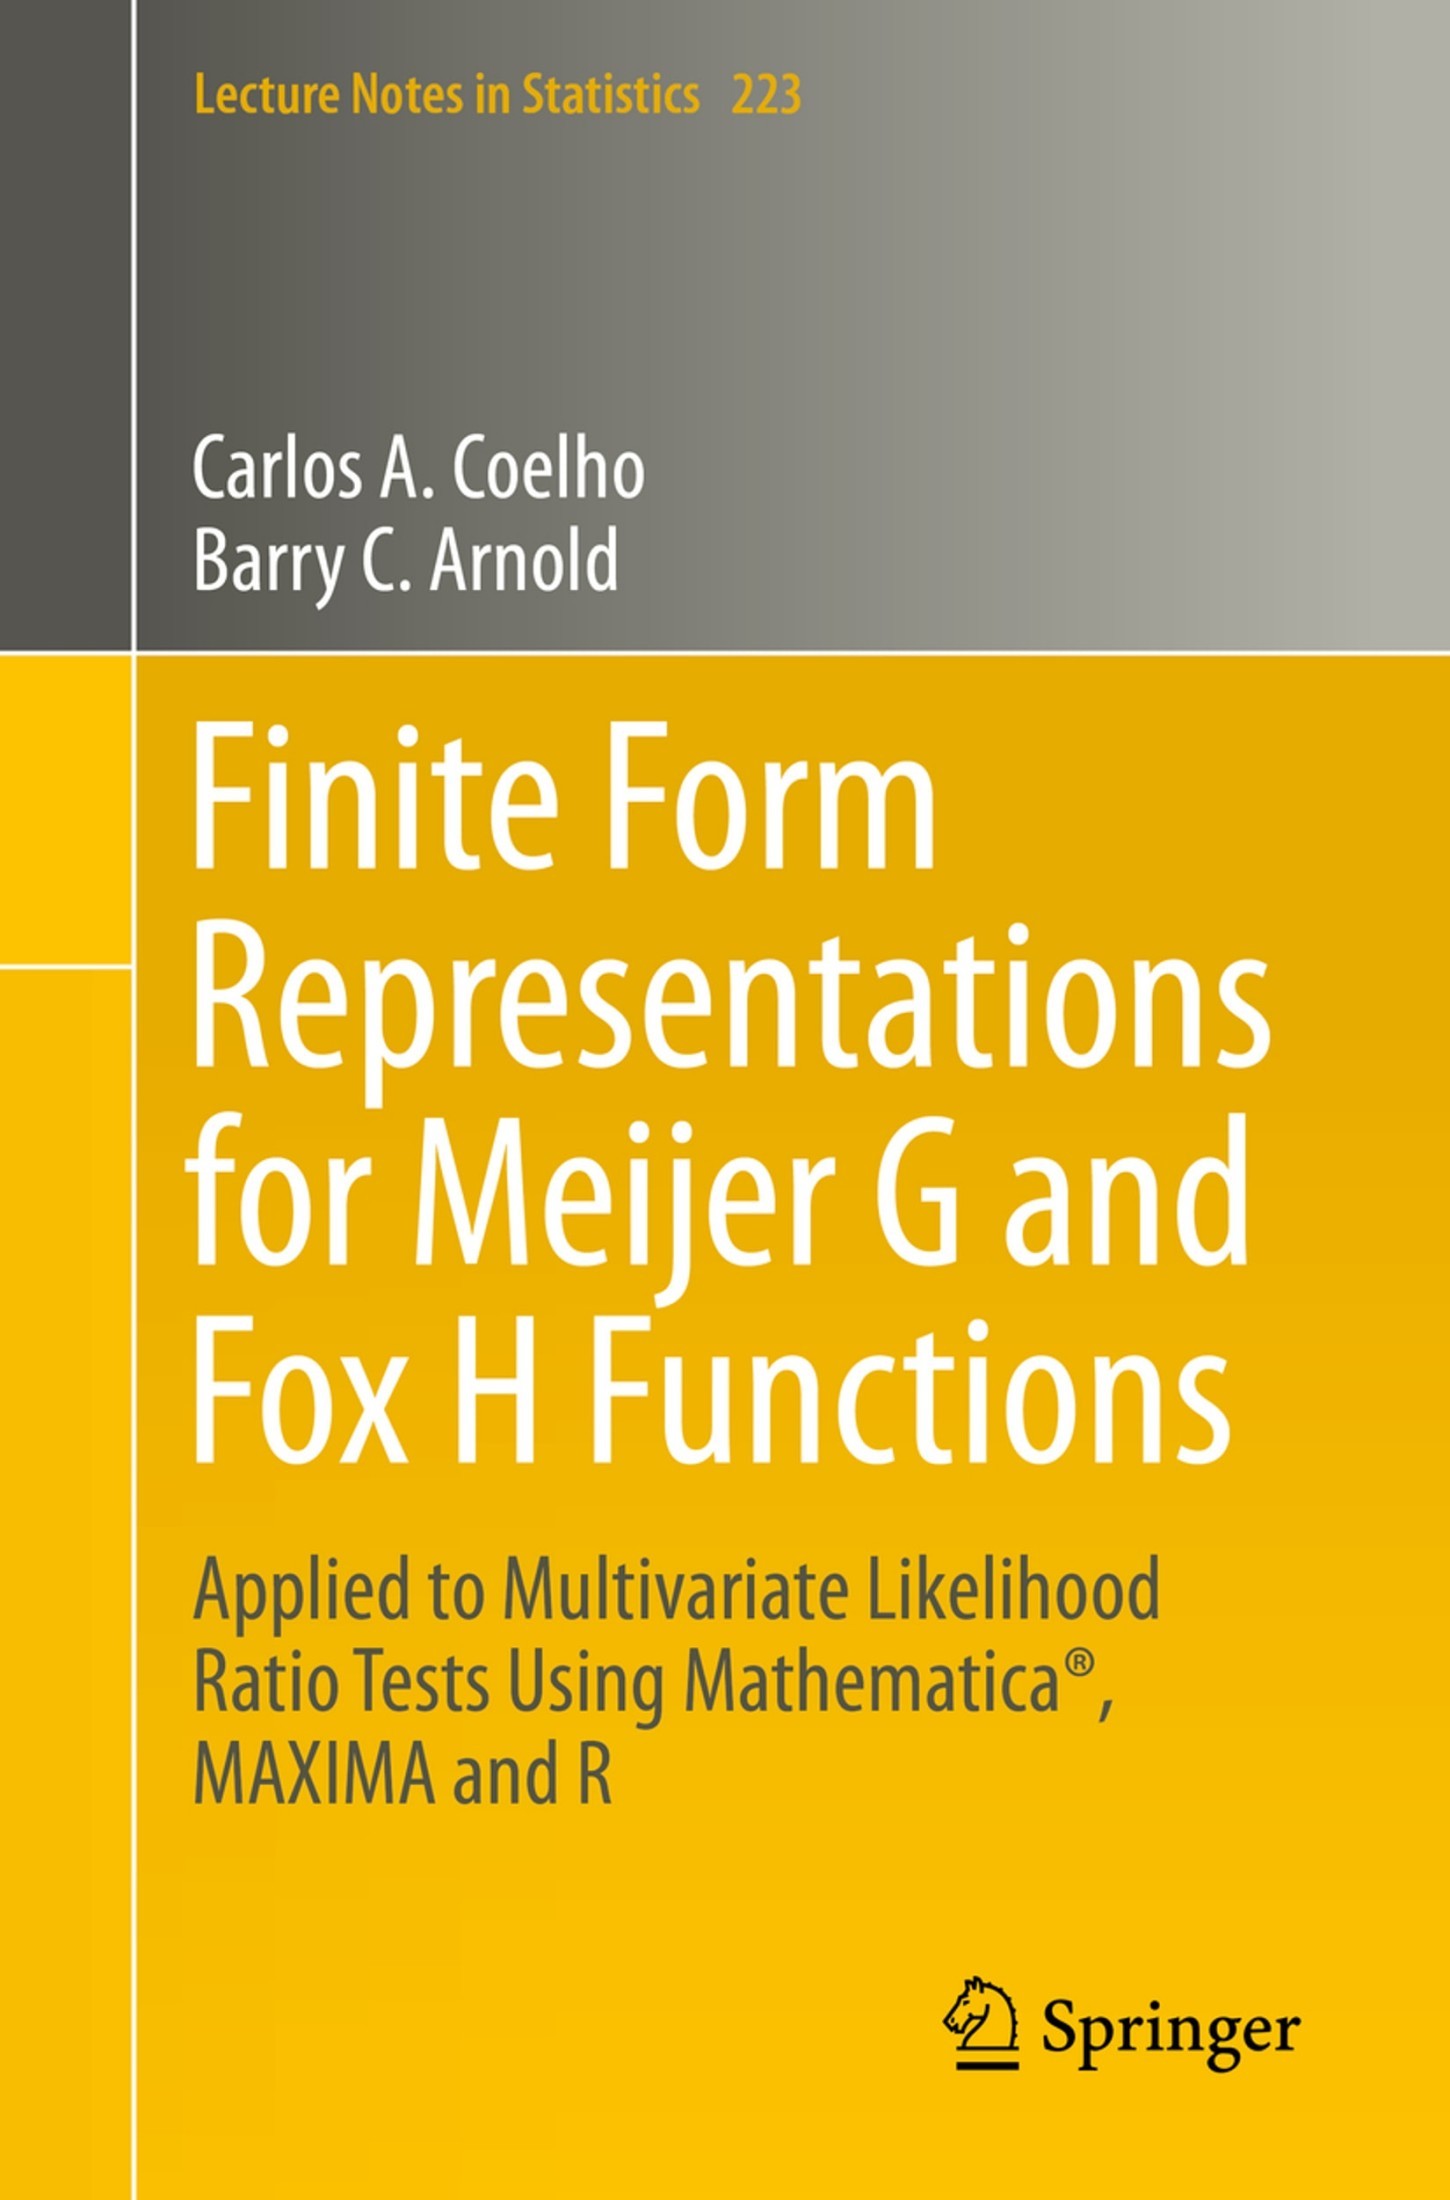 Finite Form Representations for Meijer G and Fox H Functions